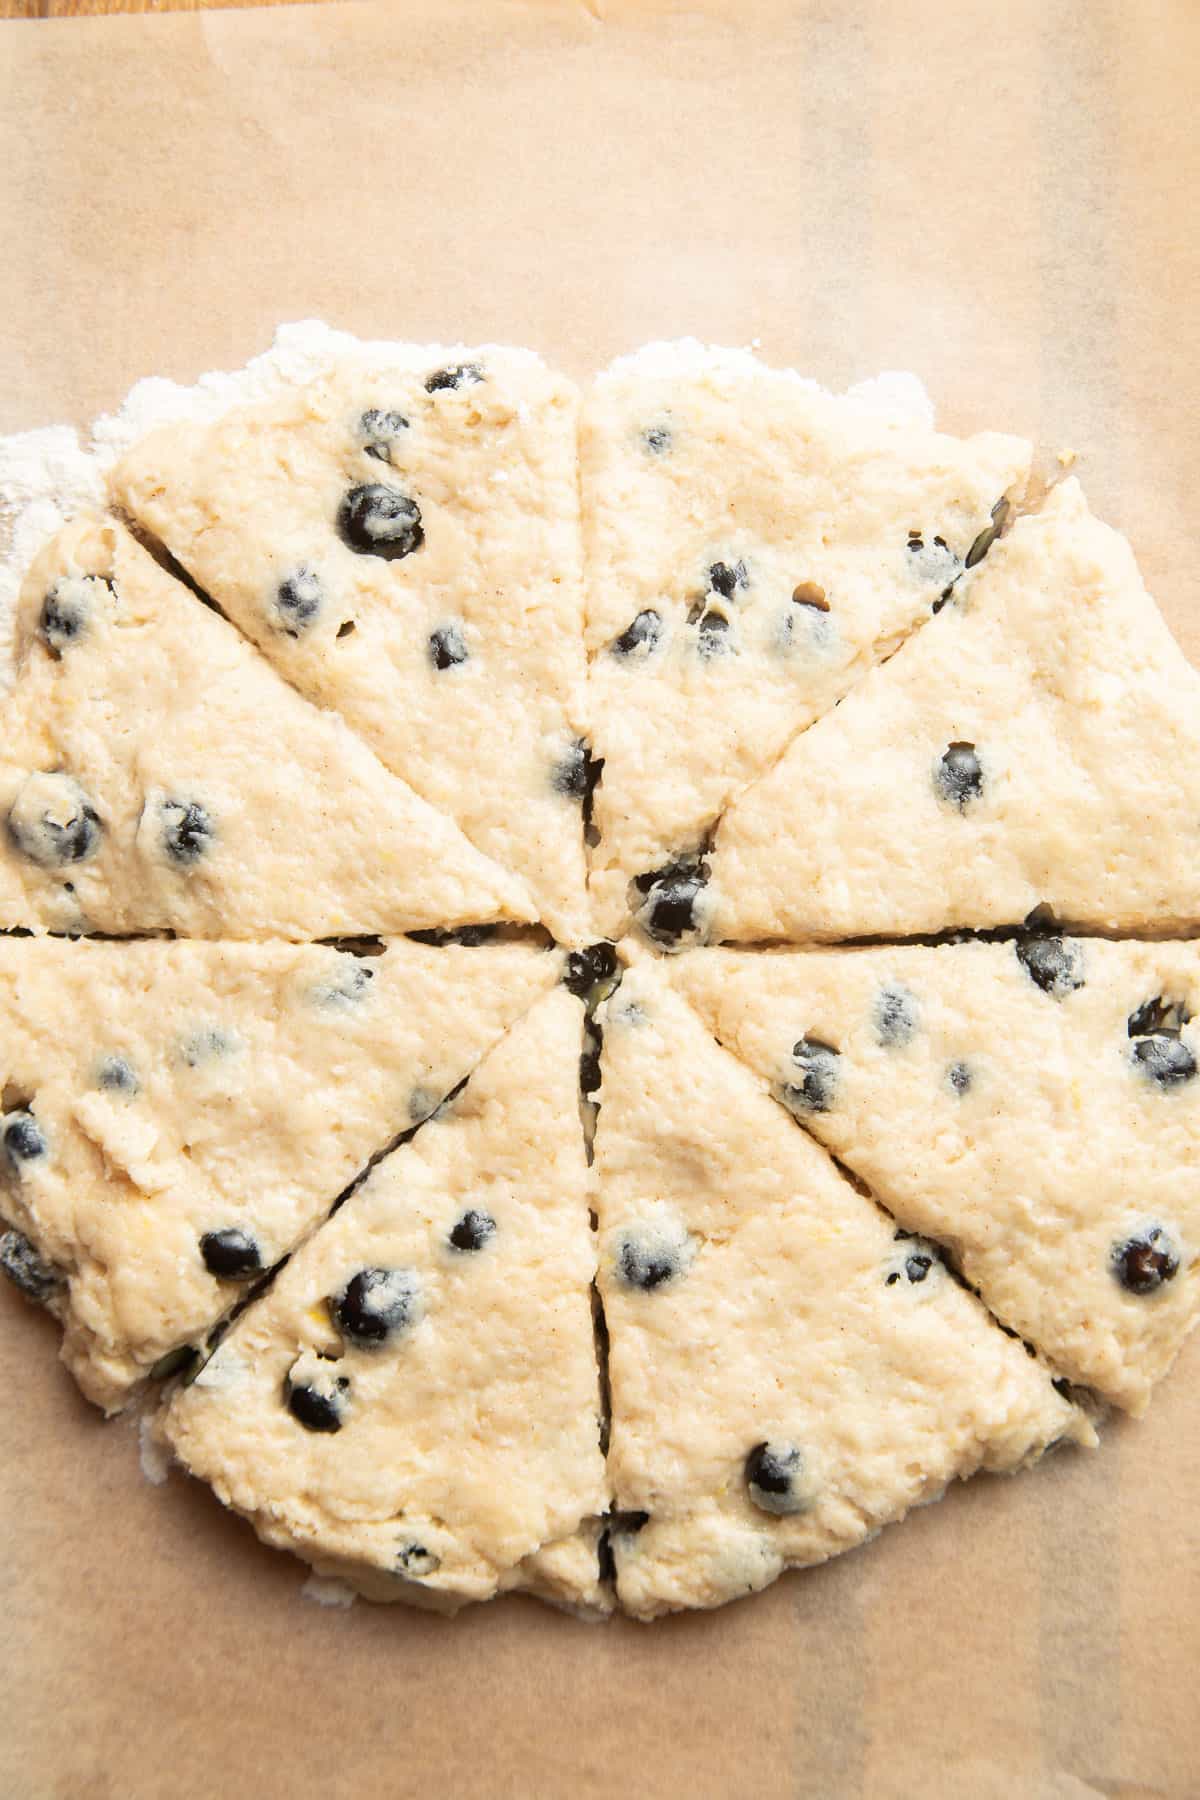 Blueberry scone dough shaped into a circle and cut into 8 wedges.